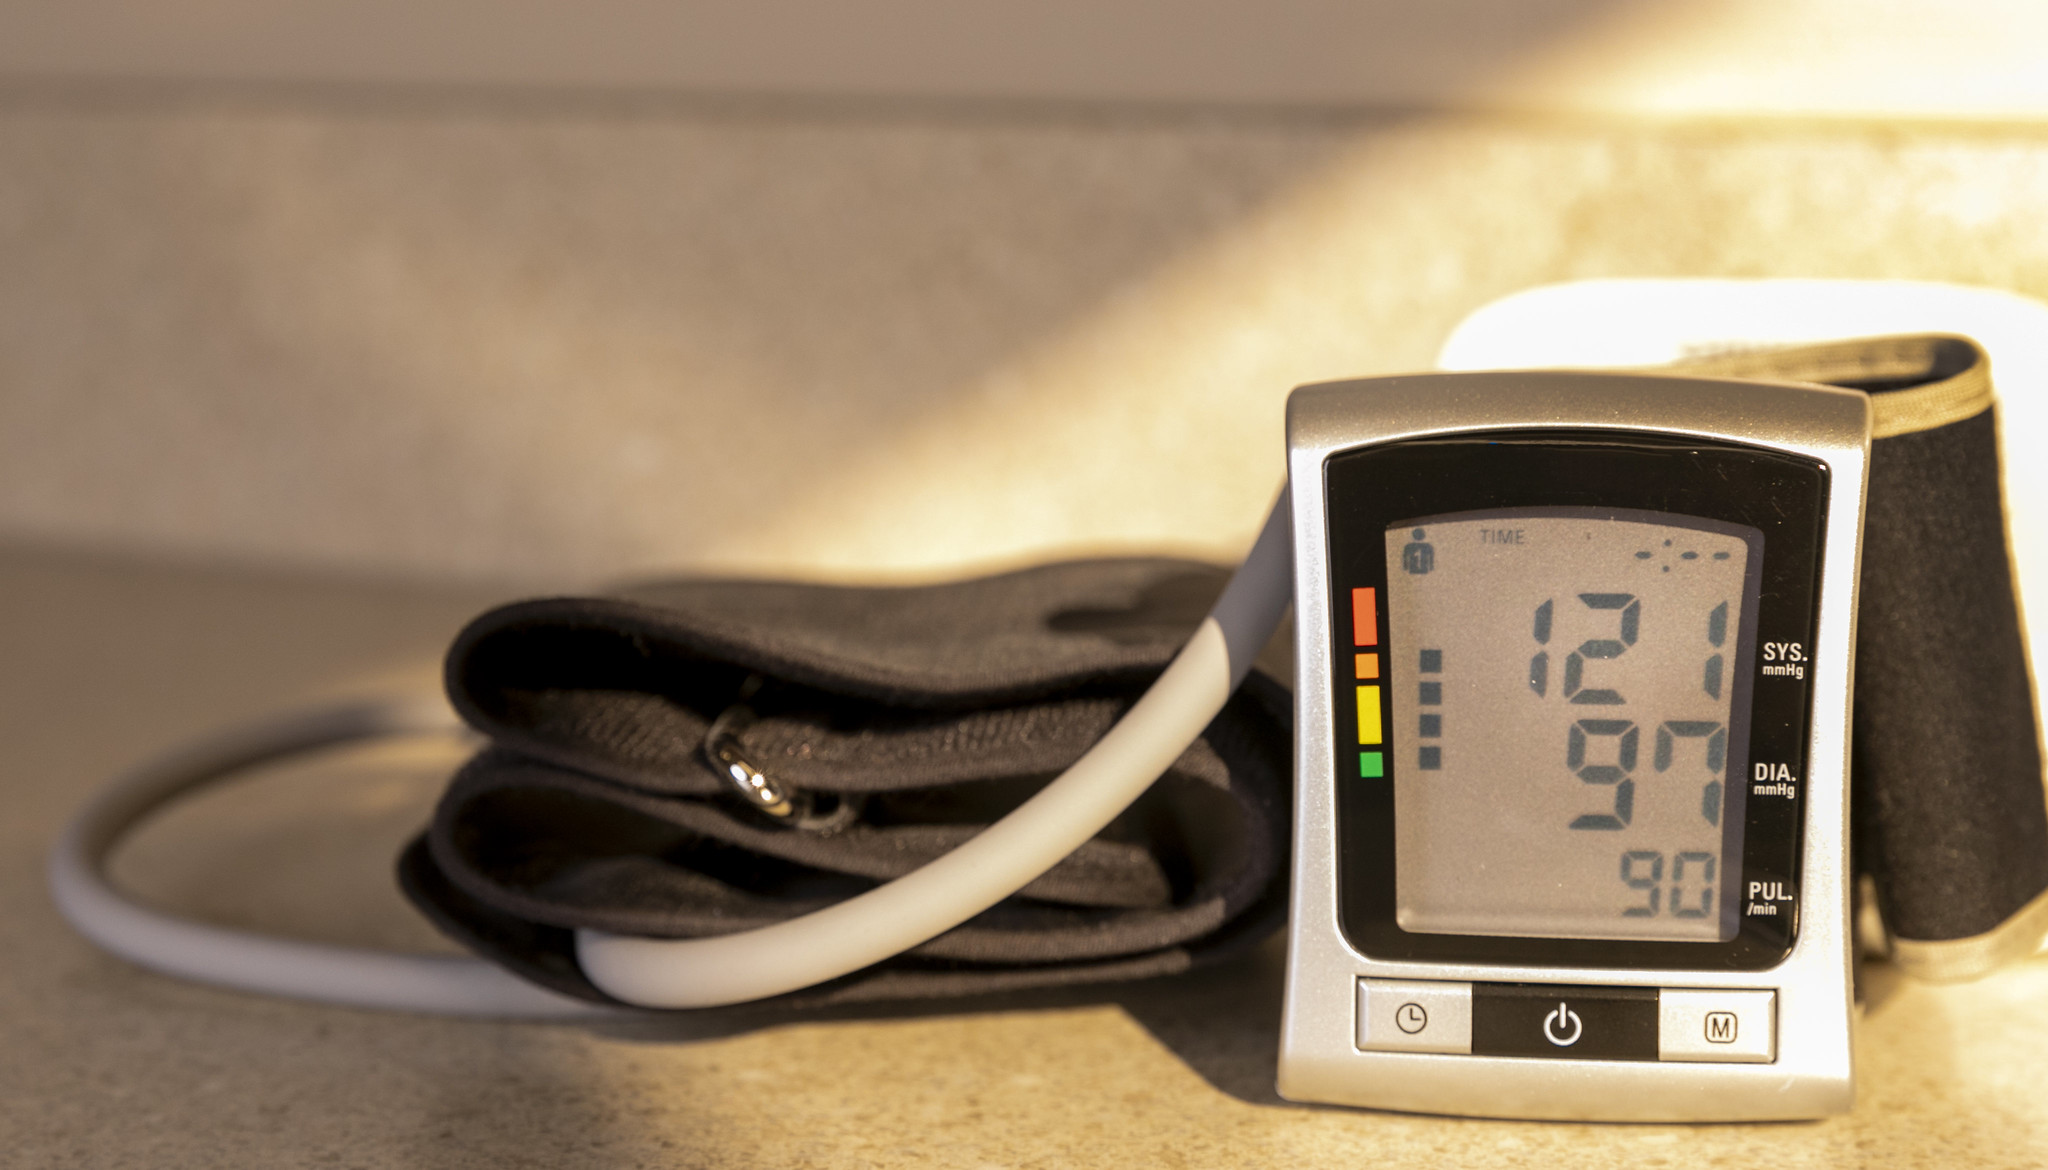 A blood pressure monitor with the arm cuff in the center and the monitor itself on the right.